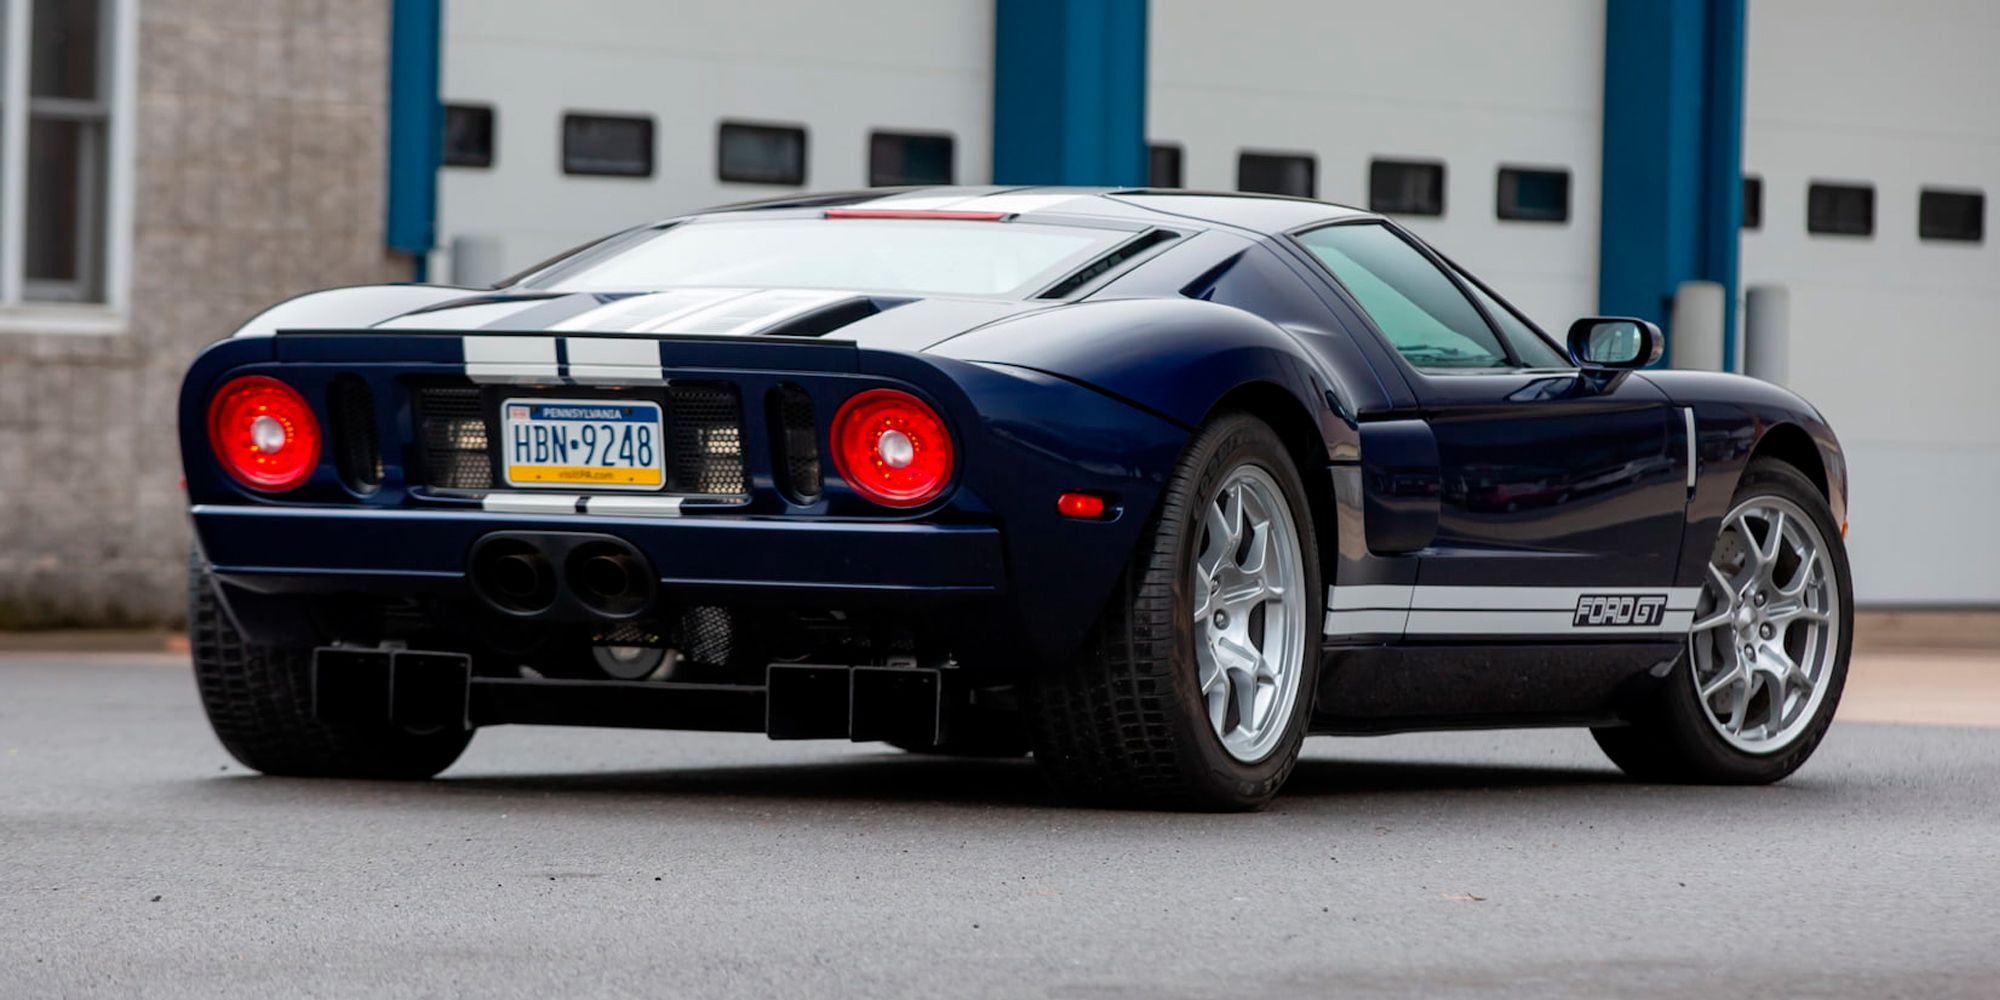 The rear of the 2005 Ford GT